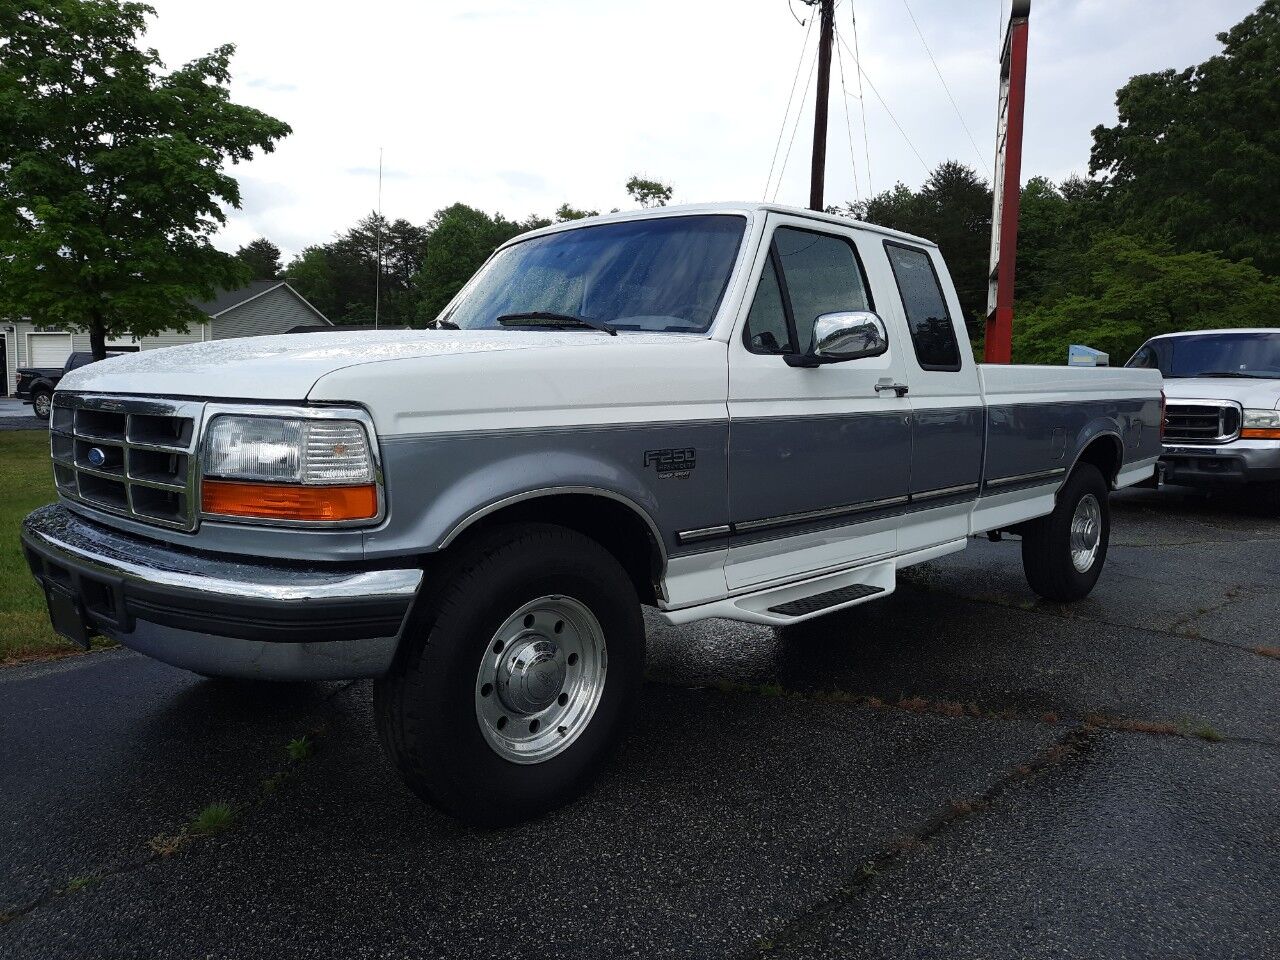 1997 Ford F-250 For Sale - Carsforsale.com®